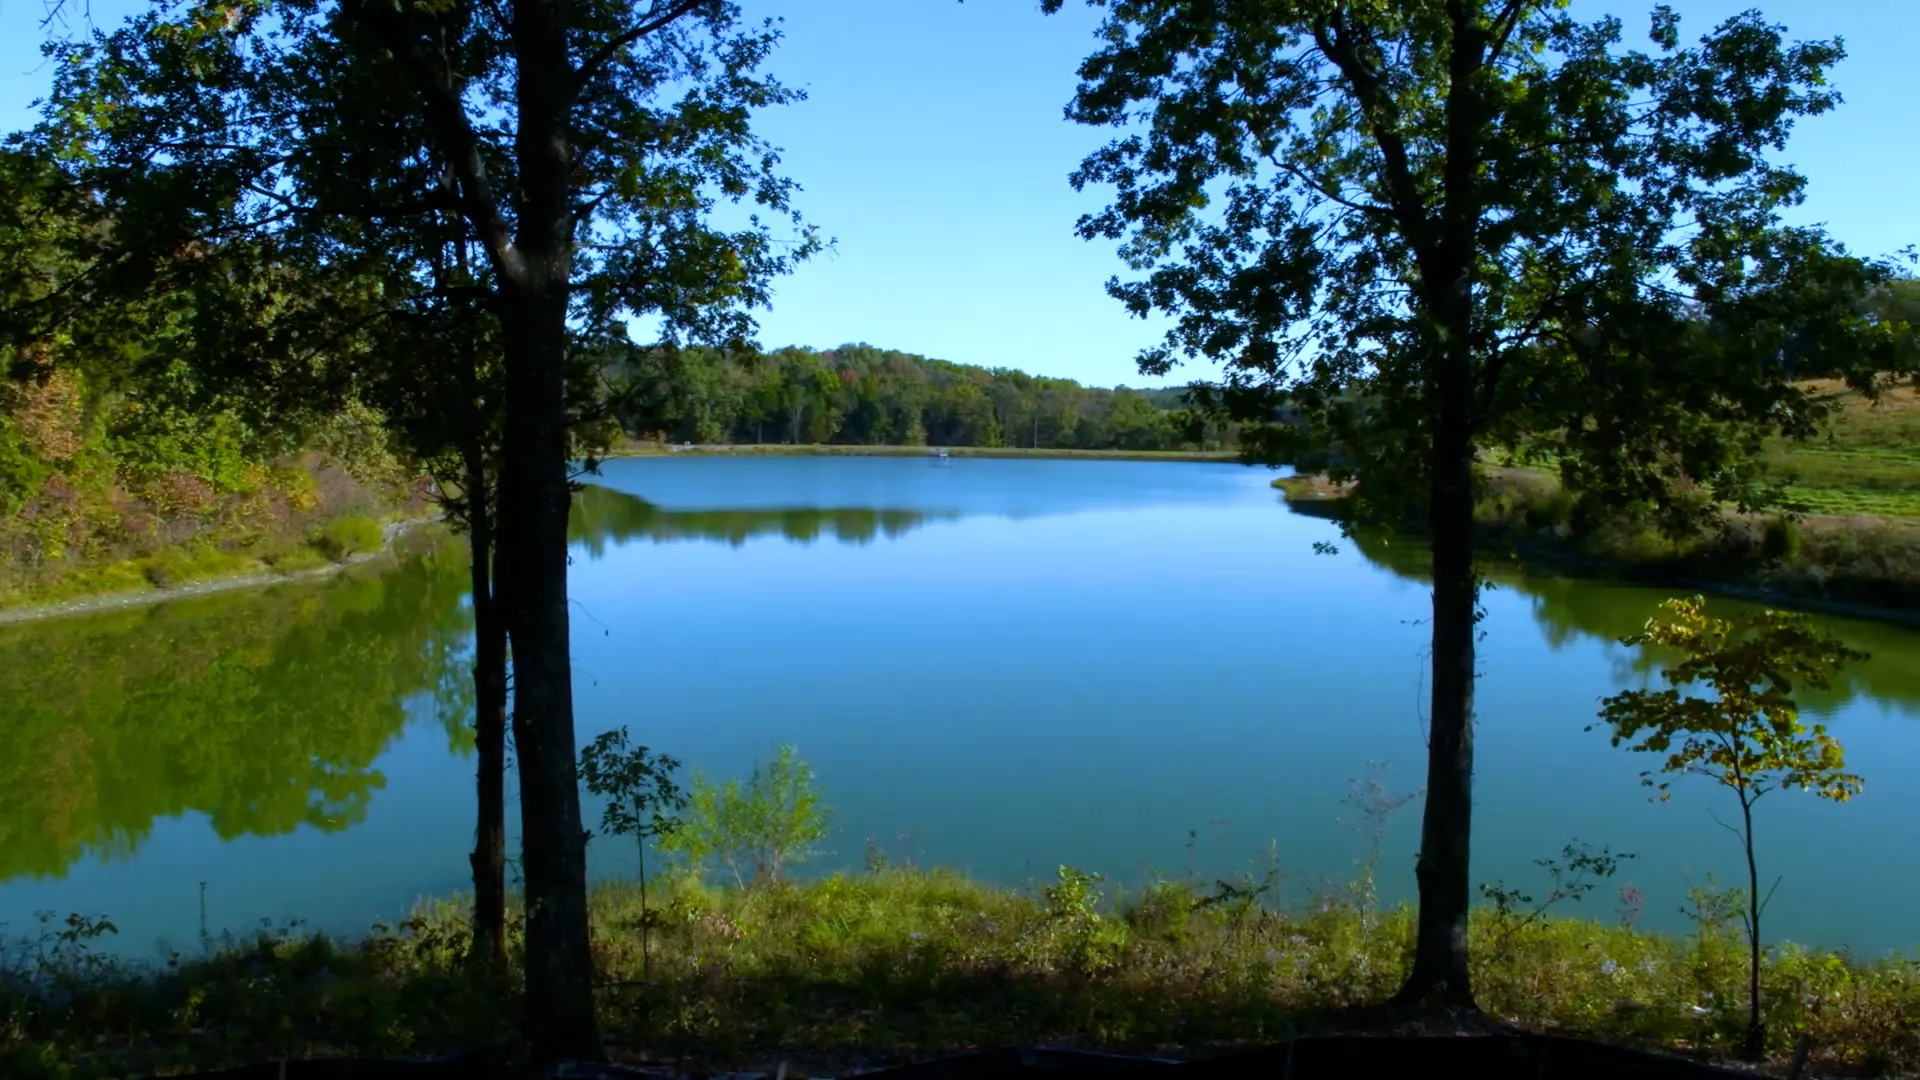 A blue lake on a sunny day surrounded by green banks of grass and trees. Three of the Maker's Mark distillery buildings in Loretto, Kentucky are in the distance.